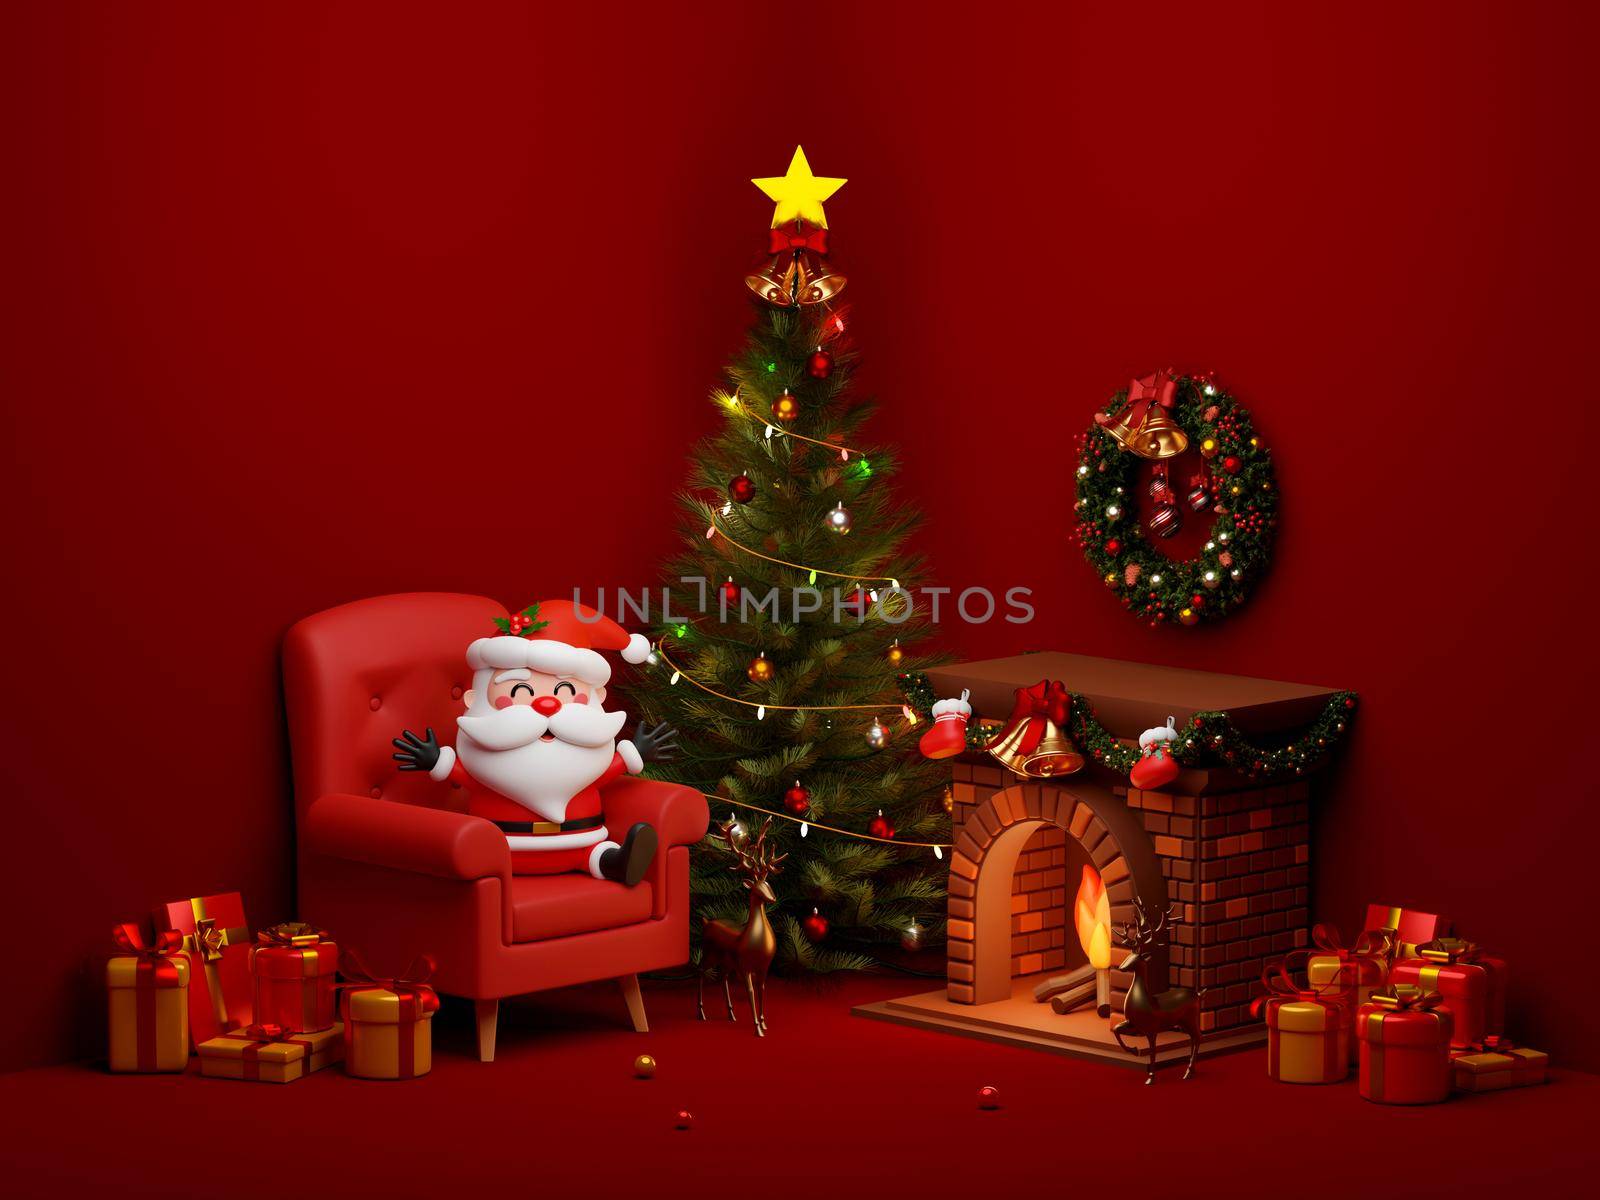 Santa Claus sitting in front of fireplace in room decorated by Christmas tree and gift box, 3d illustration by nutzchotwarut